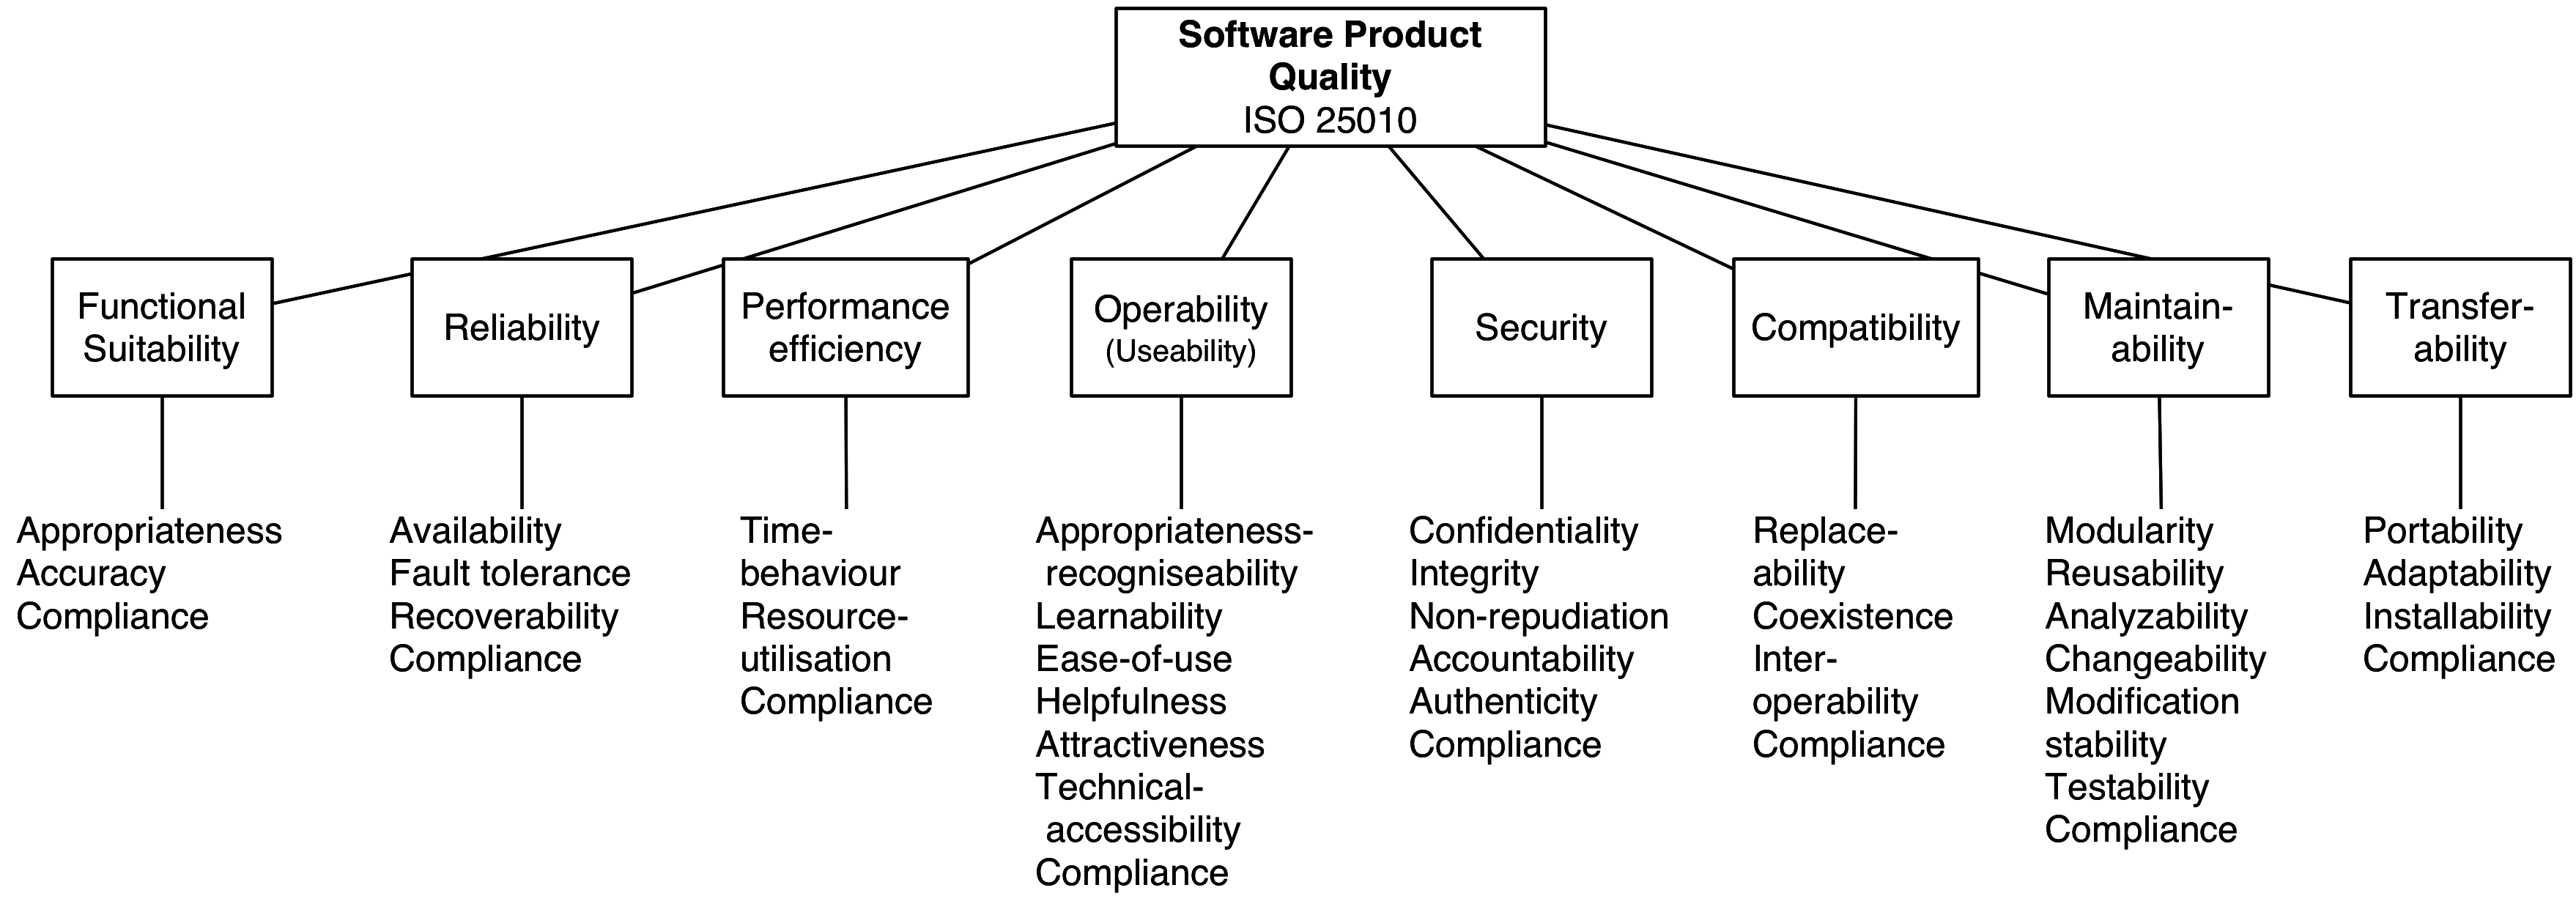 ISO 25010 Software Product Quality Tree